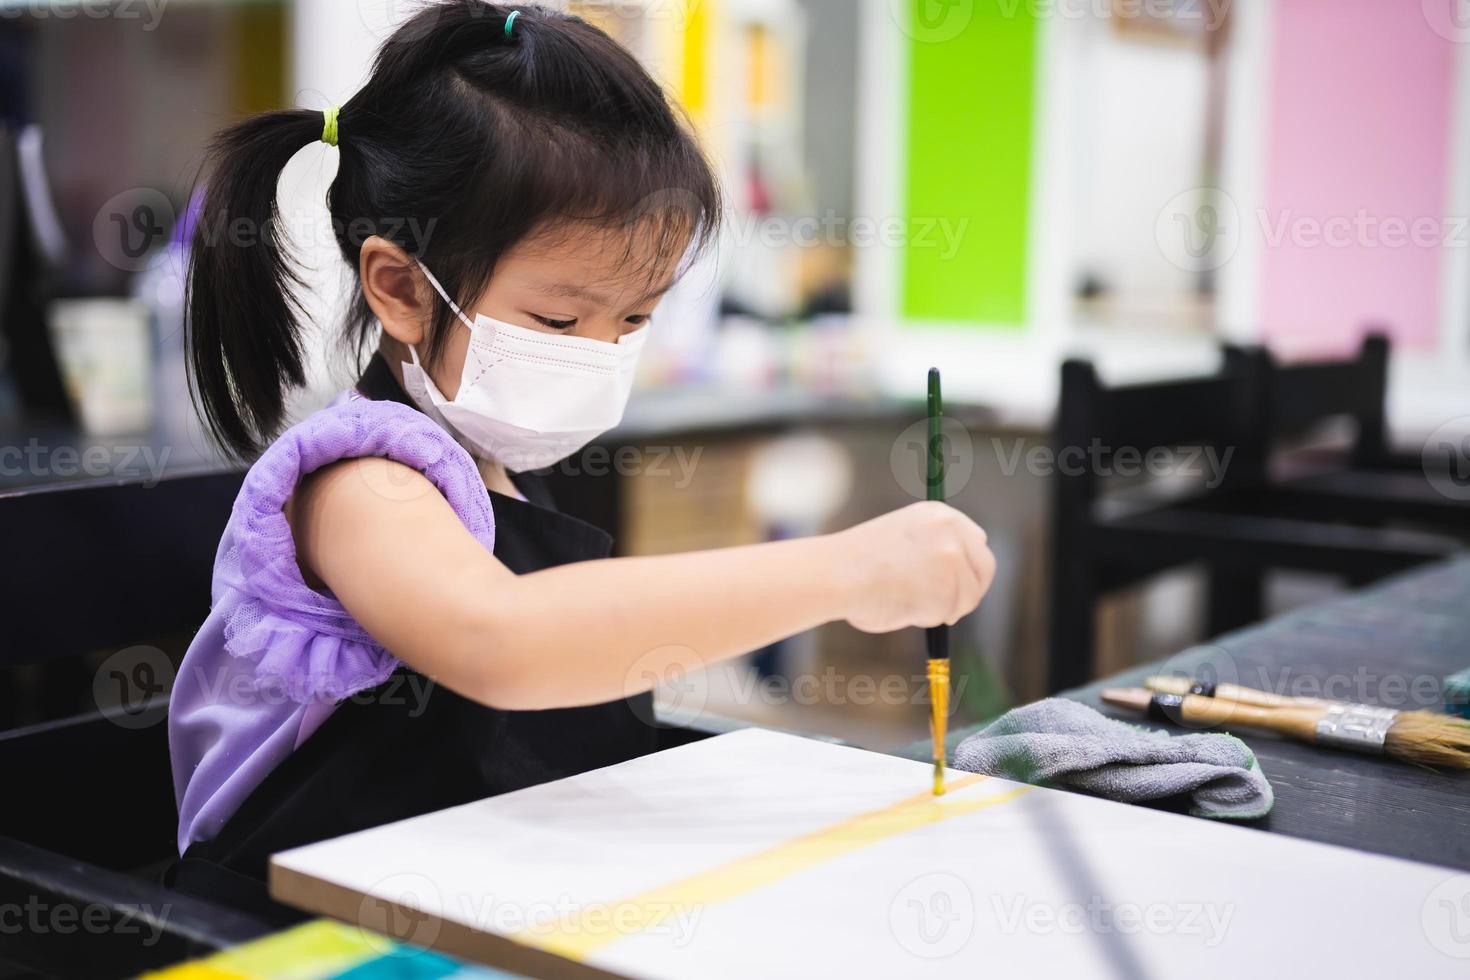 Kindergarten kid learning art water color. Children wearing white medical face mask to reduce spread of virus. photo